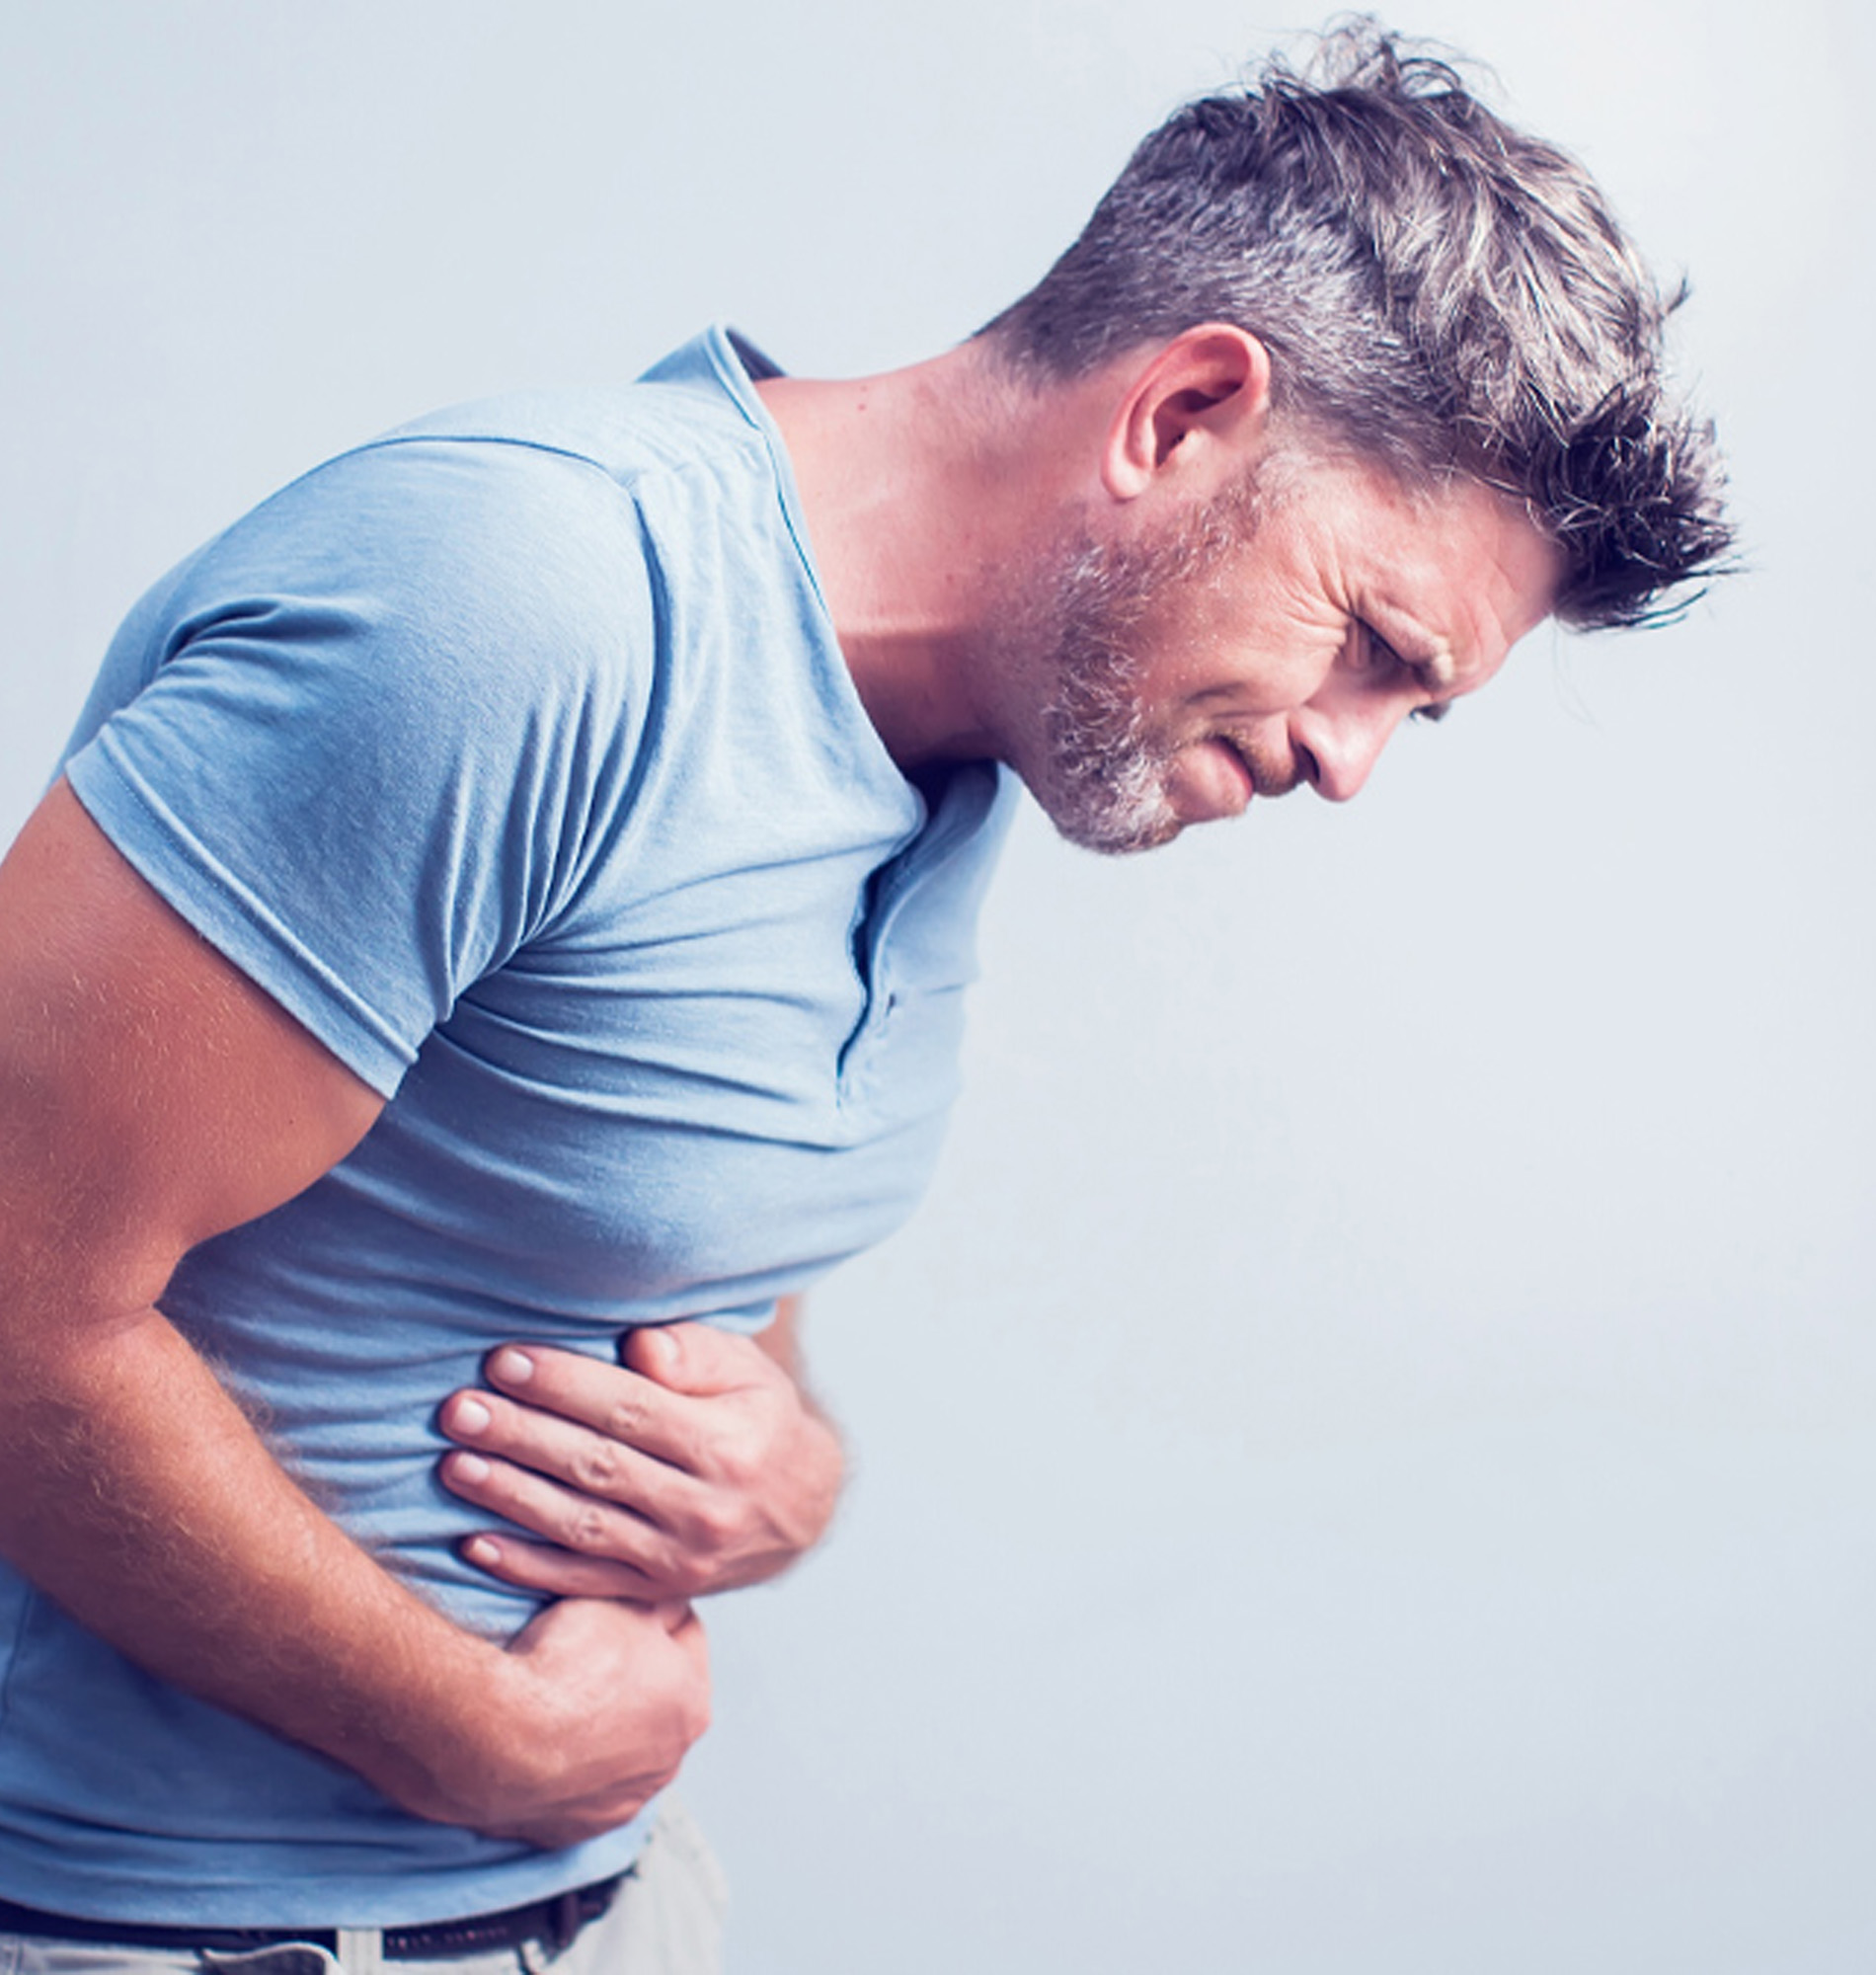 If you have chronic bouts of diarrhea, constipation, abdominal discomfort, and bloating, you may have a chronic condition. We can help you determine the reason for the digestive disorder and put you on the road to recovery.